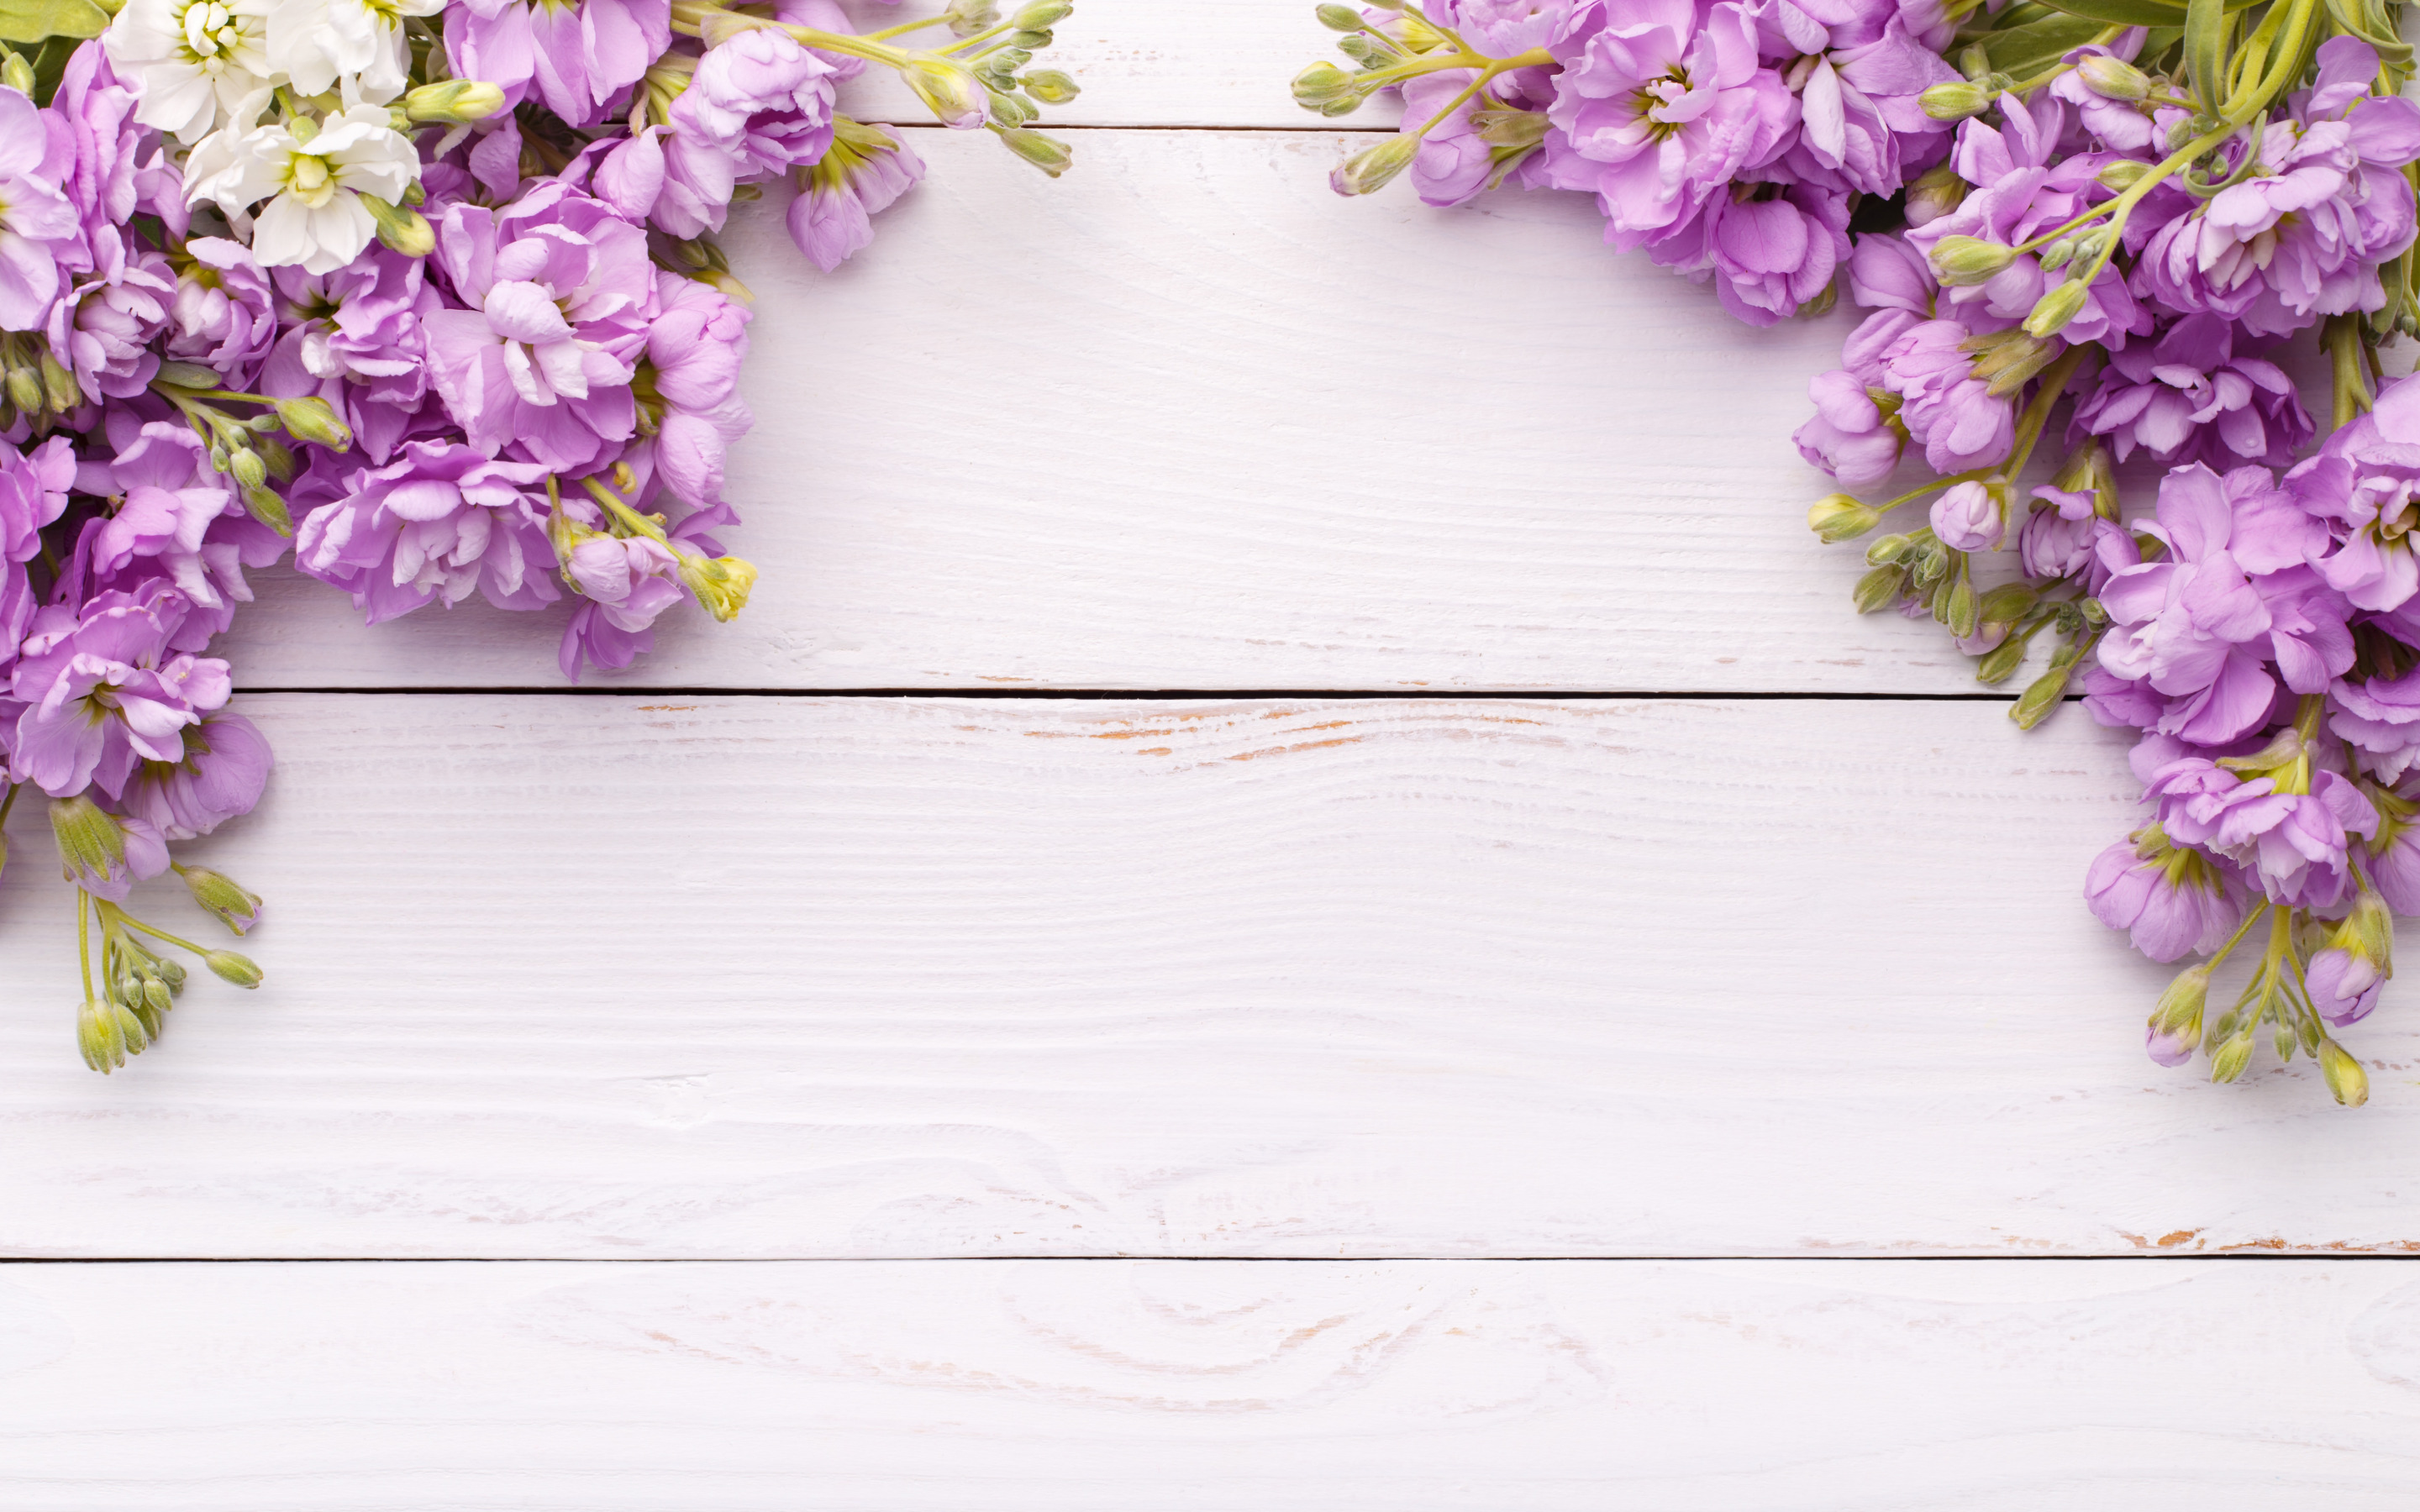 Download wallpaper frame of purple flowers, spring frame, white wooden background, wooden texture, spring for desktop with resolution 2880x1800. High Quality HD picture wallpaper